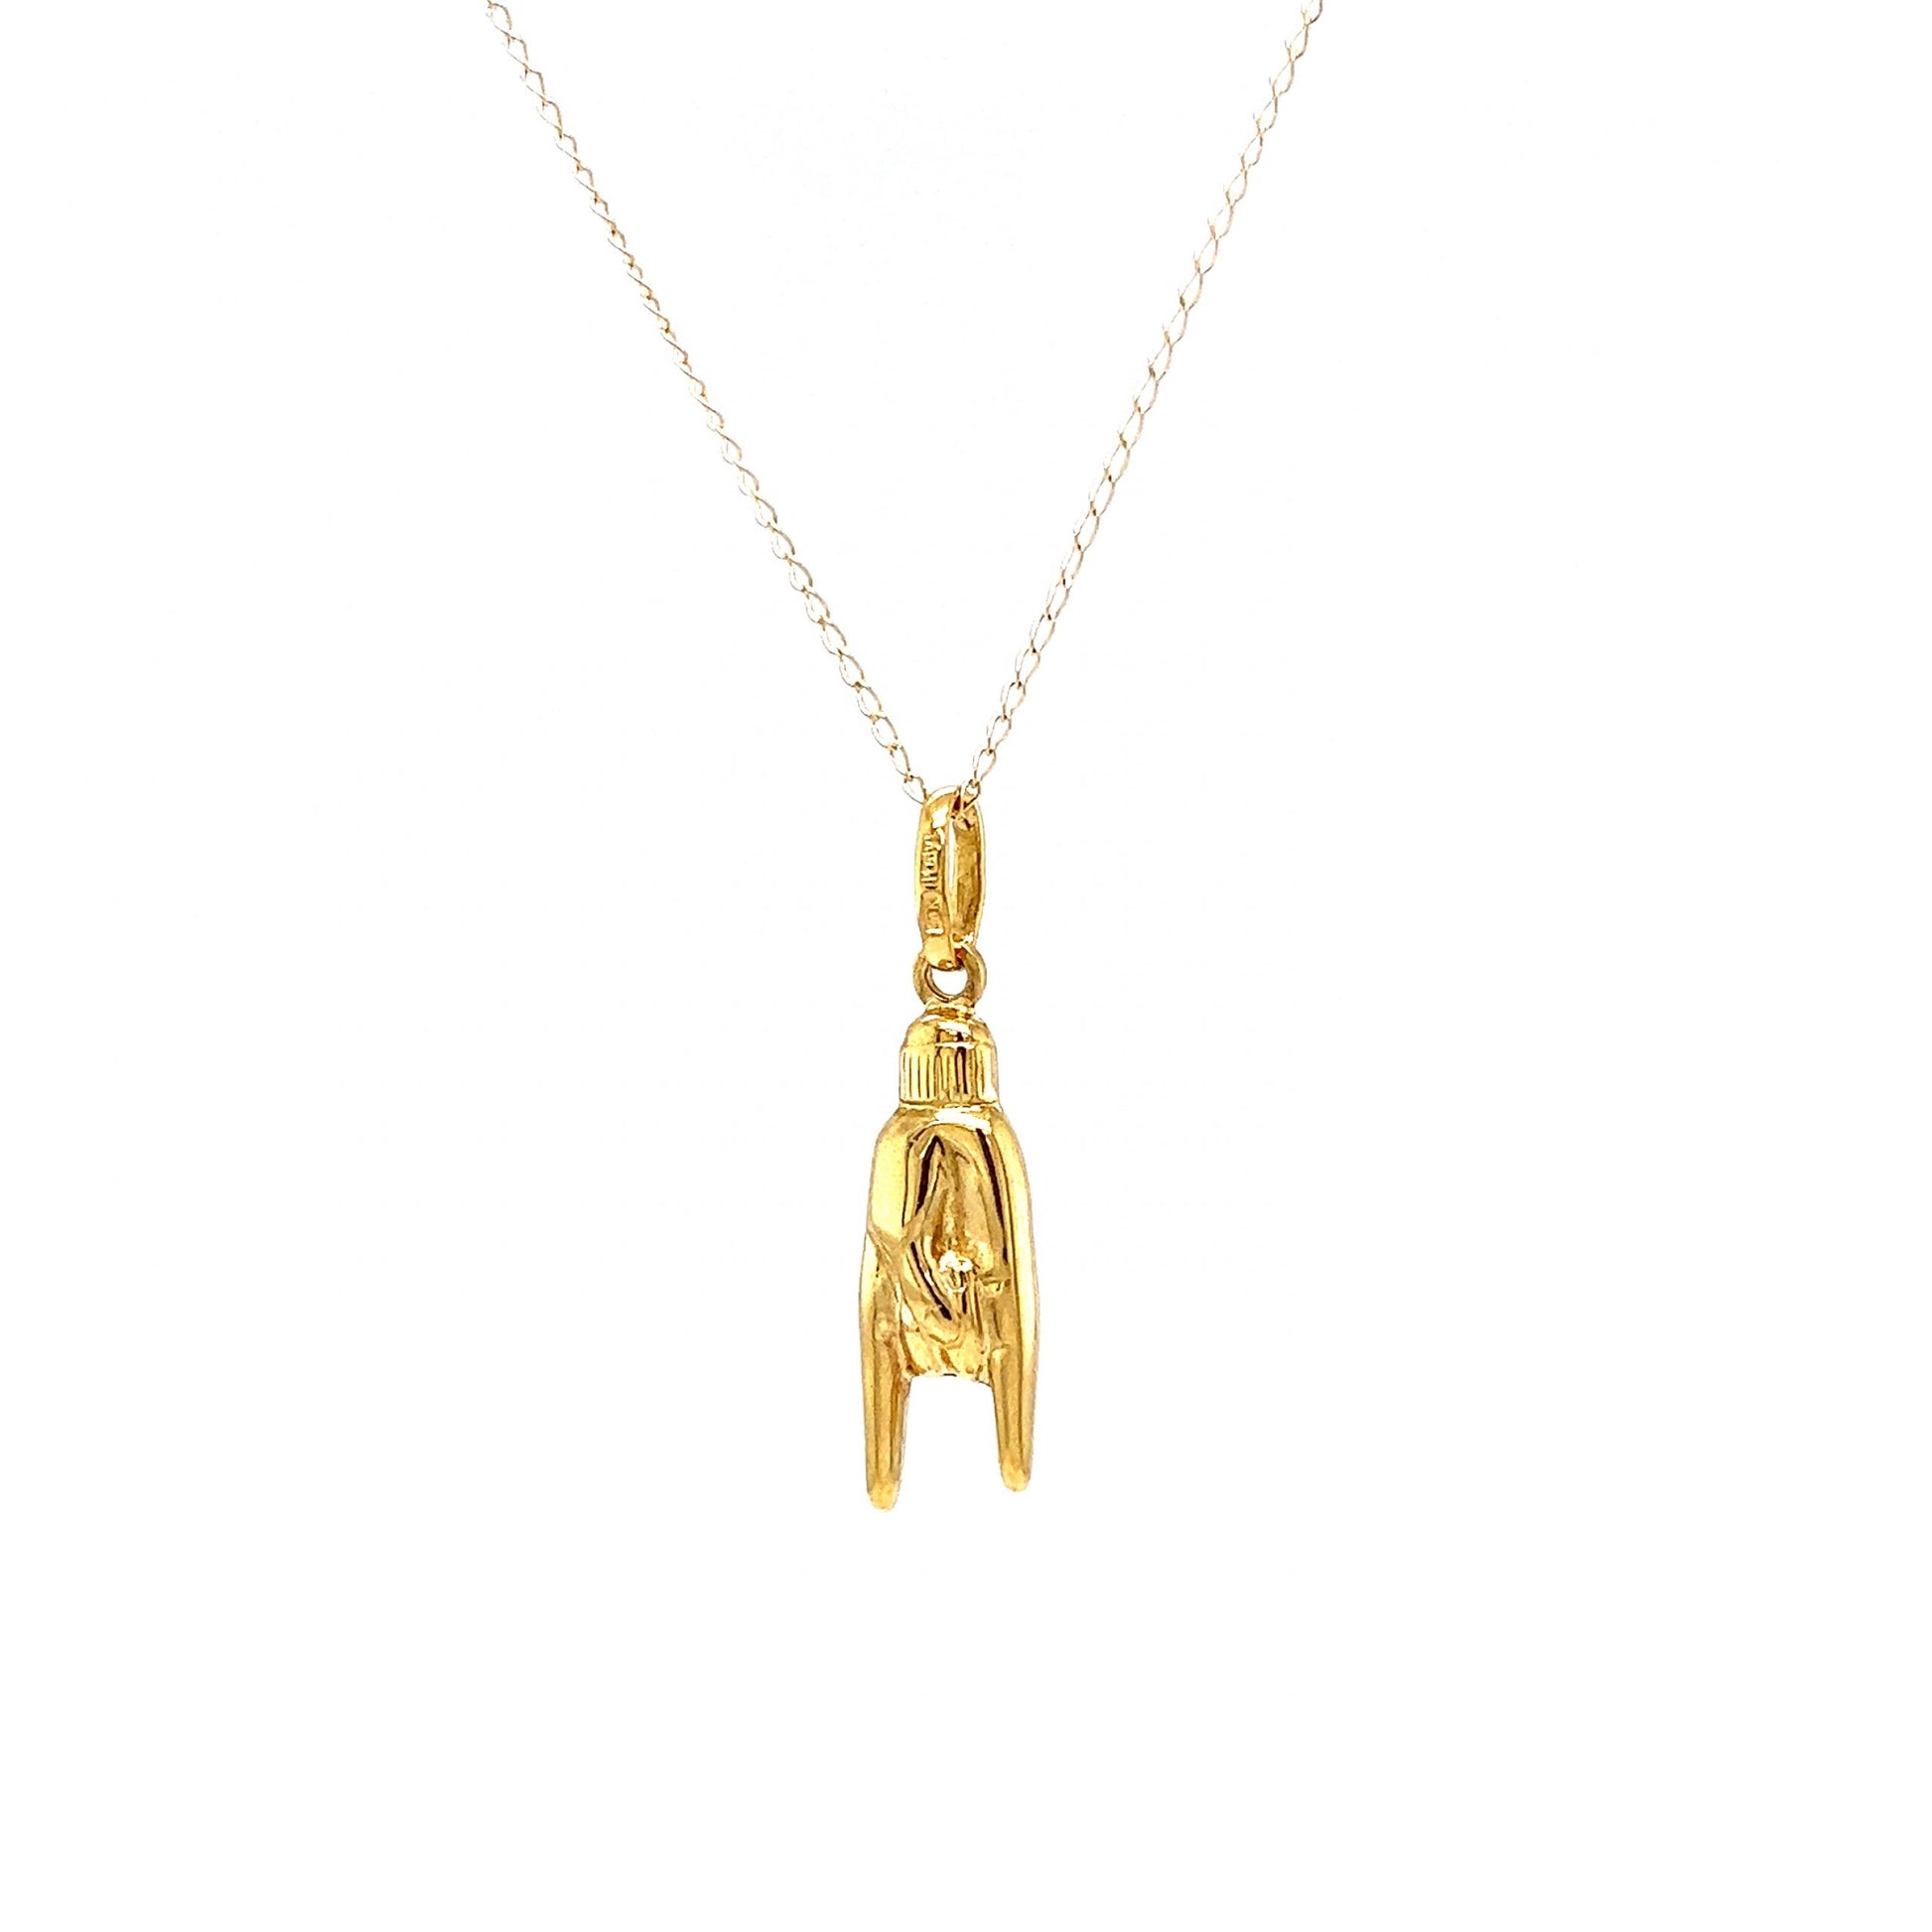 Rock On Good Luck Hand Pendant Necklace in 14k Yellow Gold